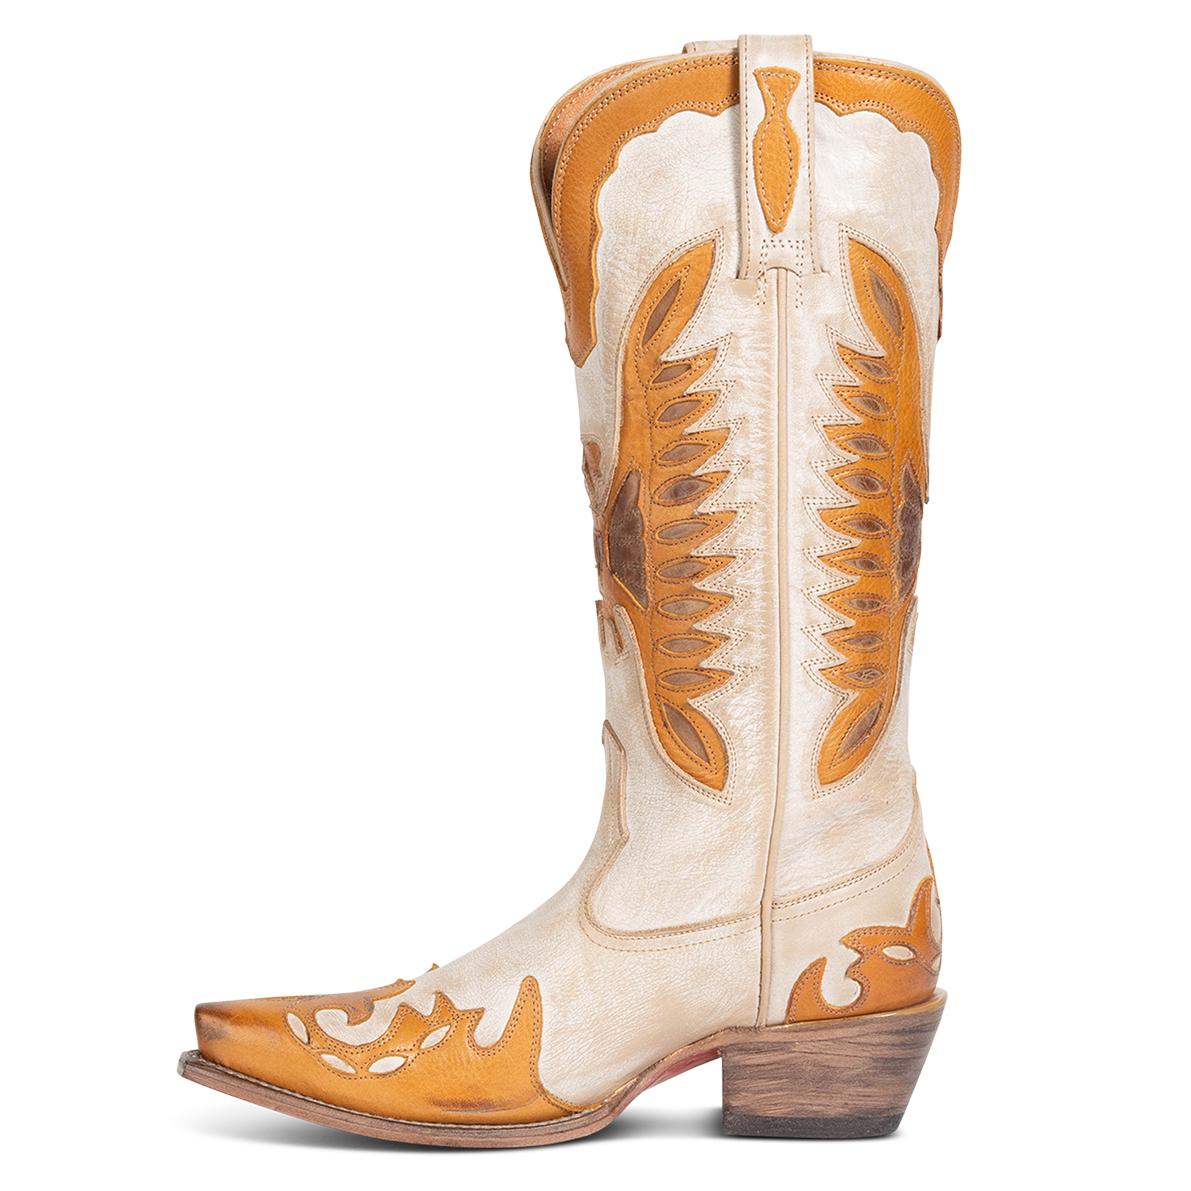 Side view showing textured design, stitch detailing and pull straps on FREEBIRD women's Willie beige multi western leather boot